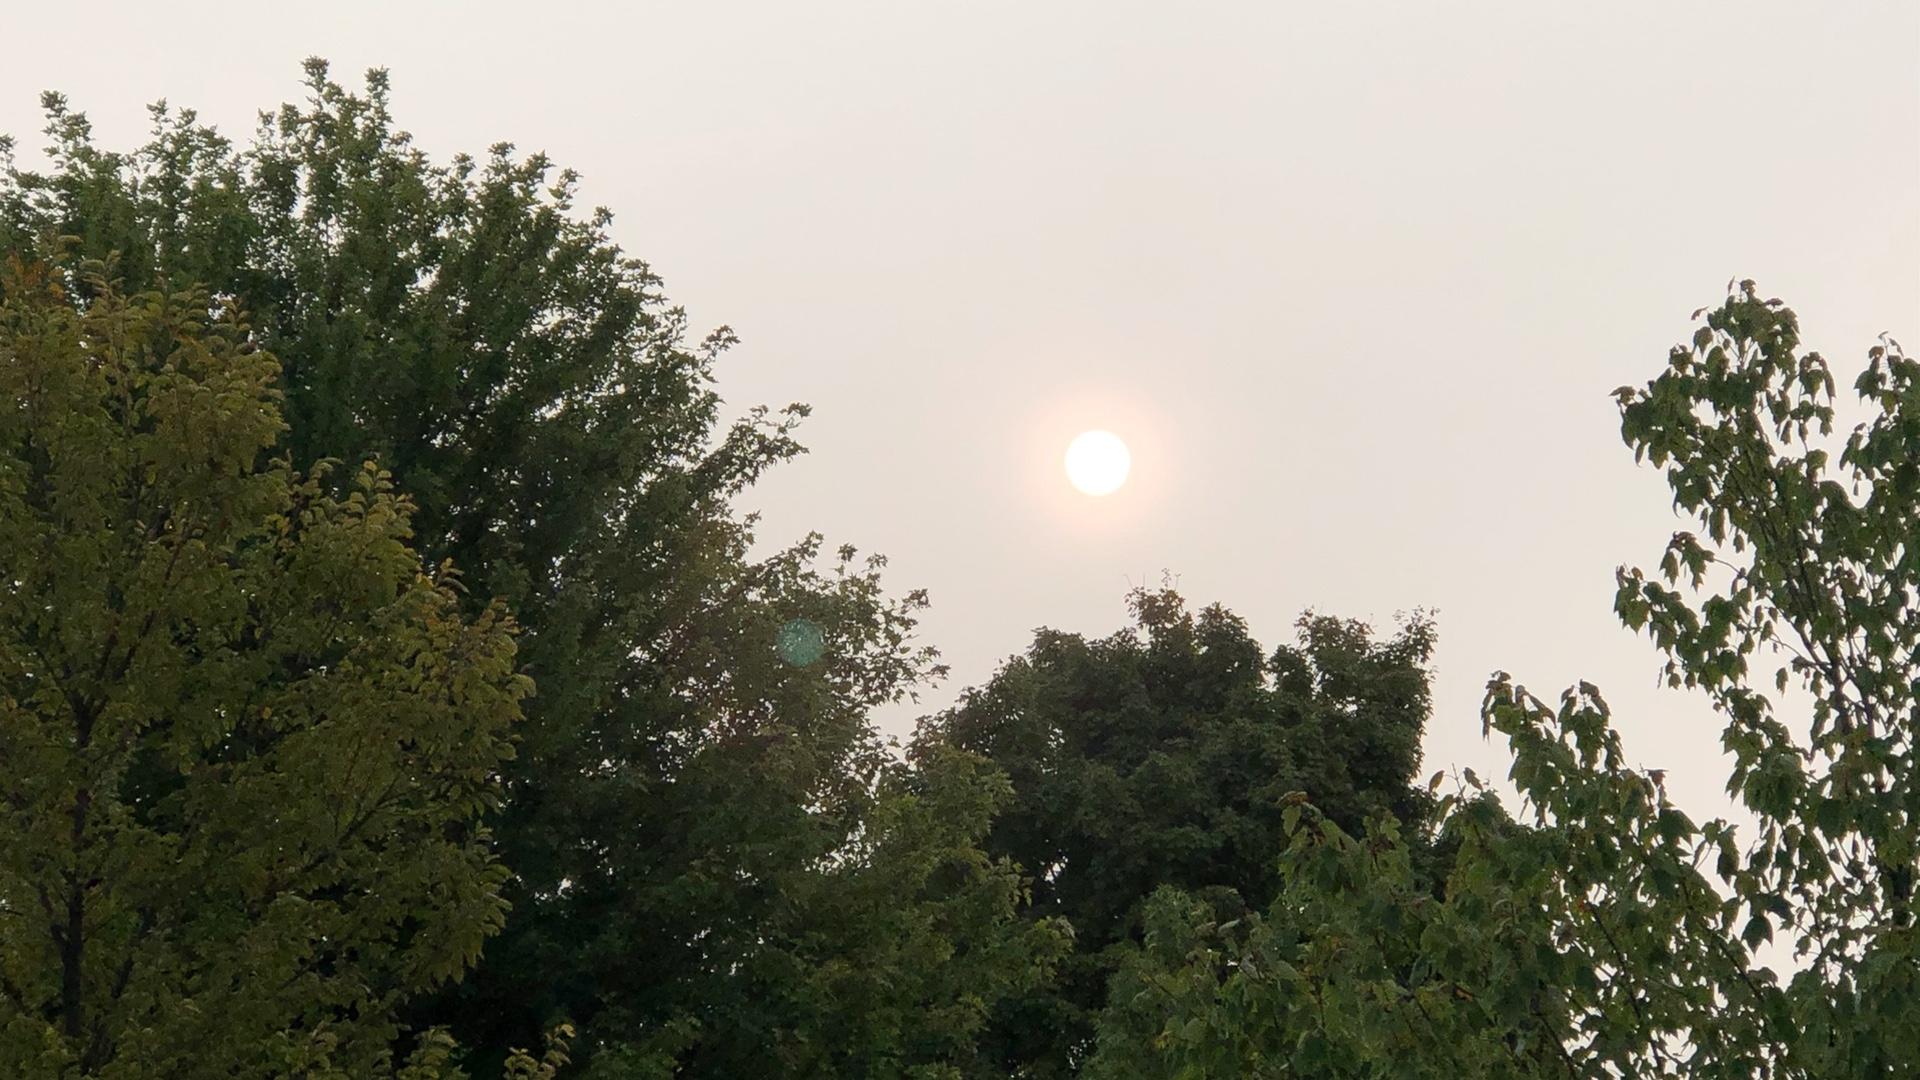 Hazy skies over Chicago are due to smoke from West Coast wildfires. (Patty Wetli / WTTW News)